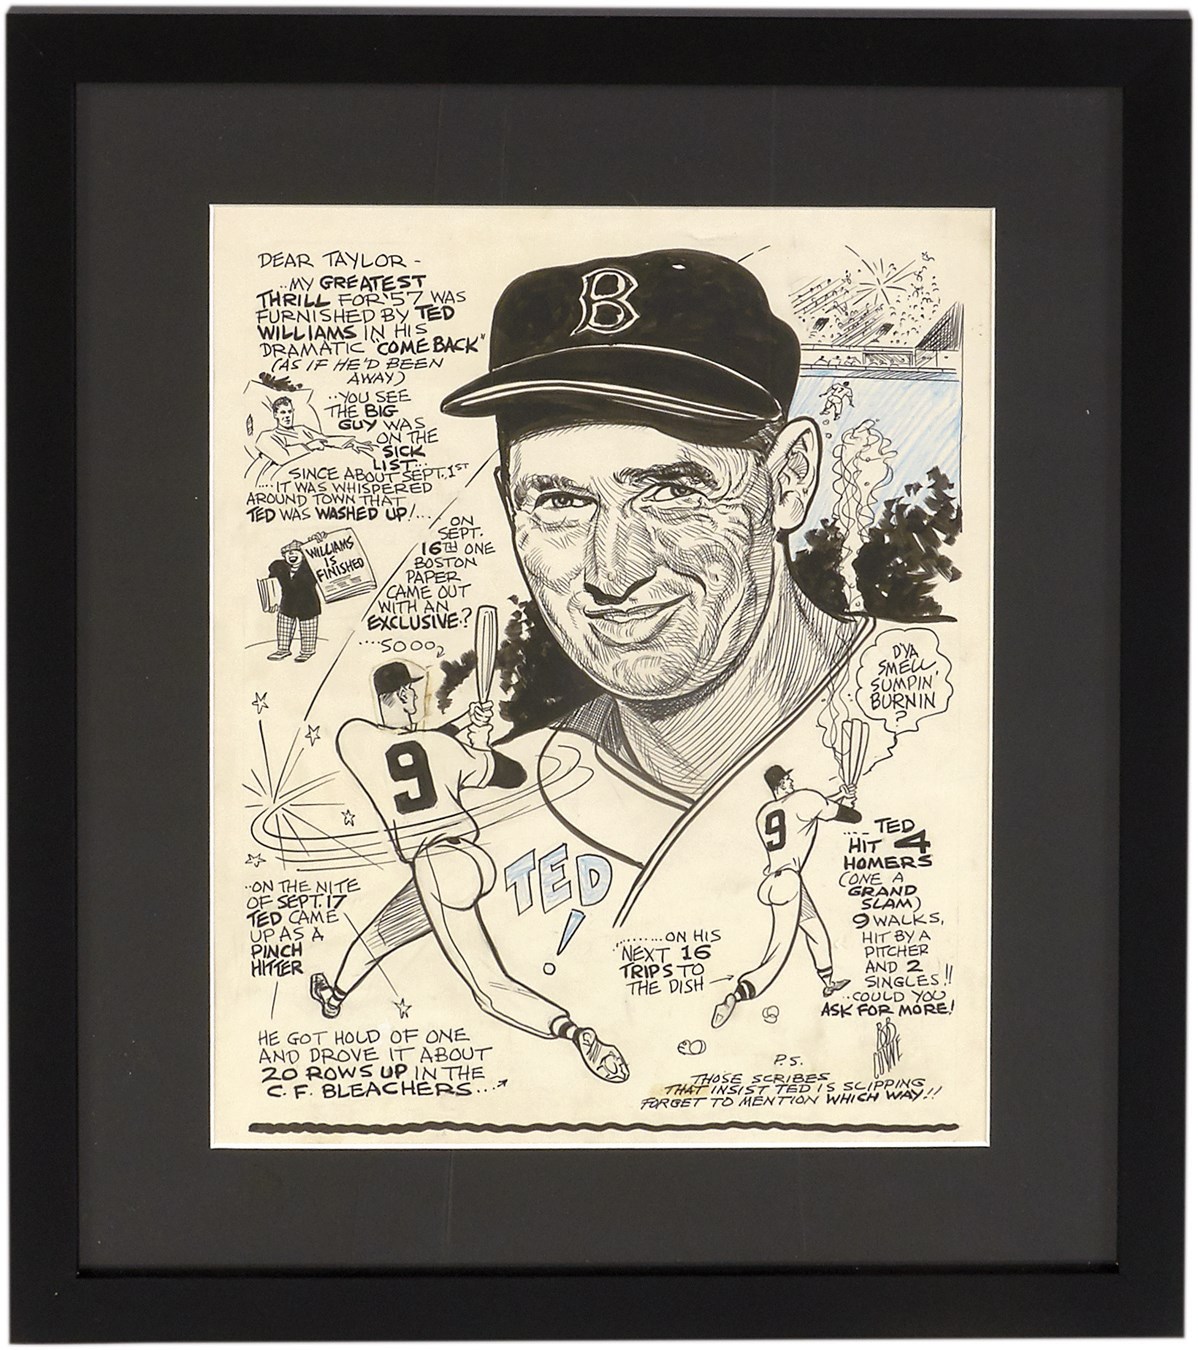 1957 Ted Williams Comeback Original Art by Bob Coyne - Published in The Sporting News